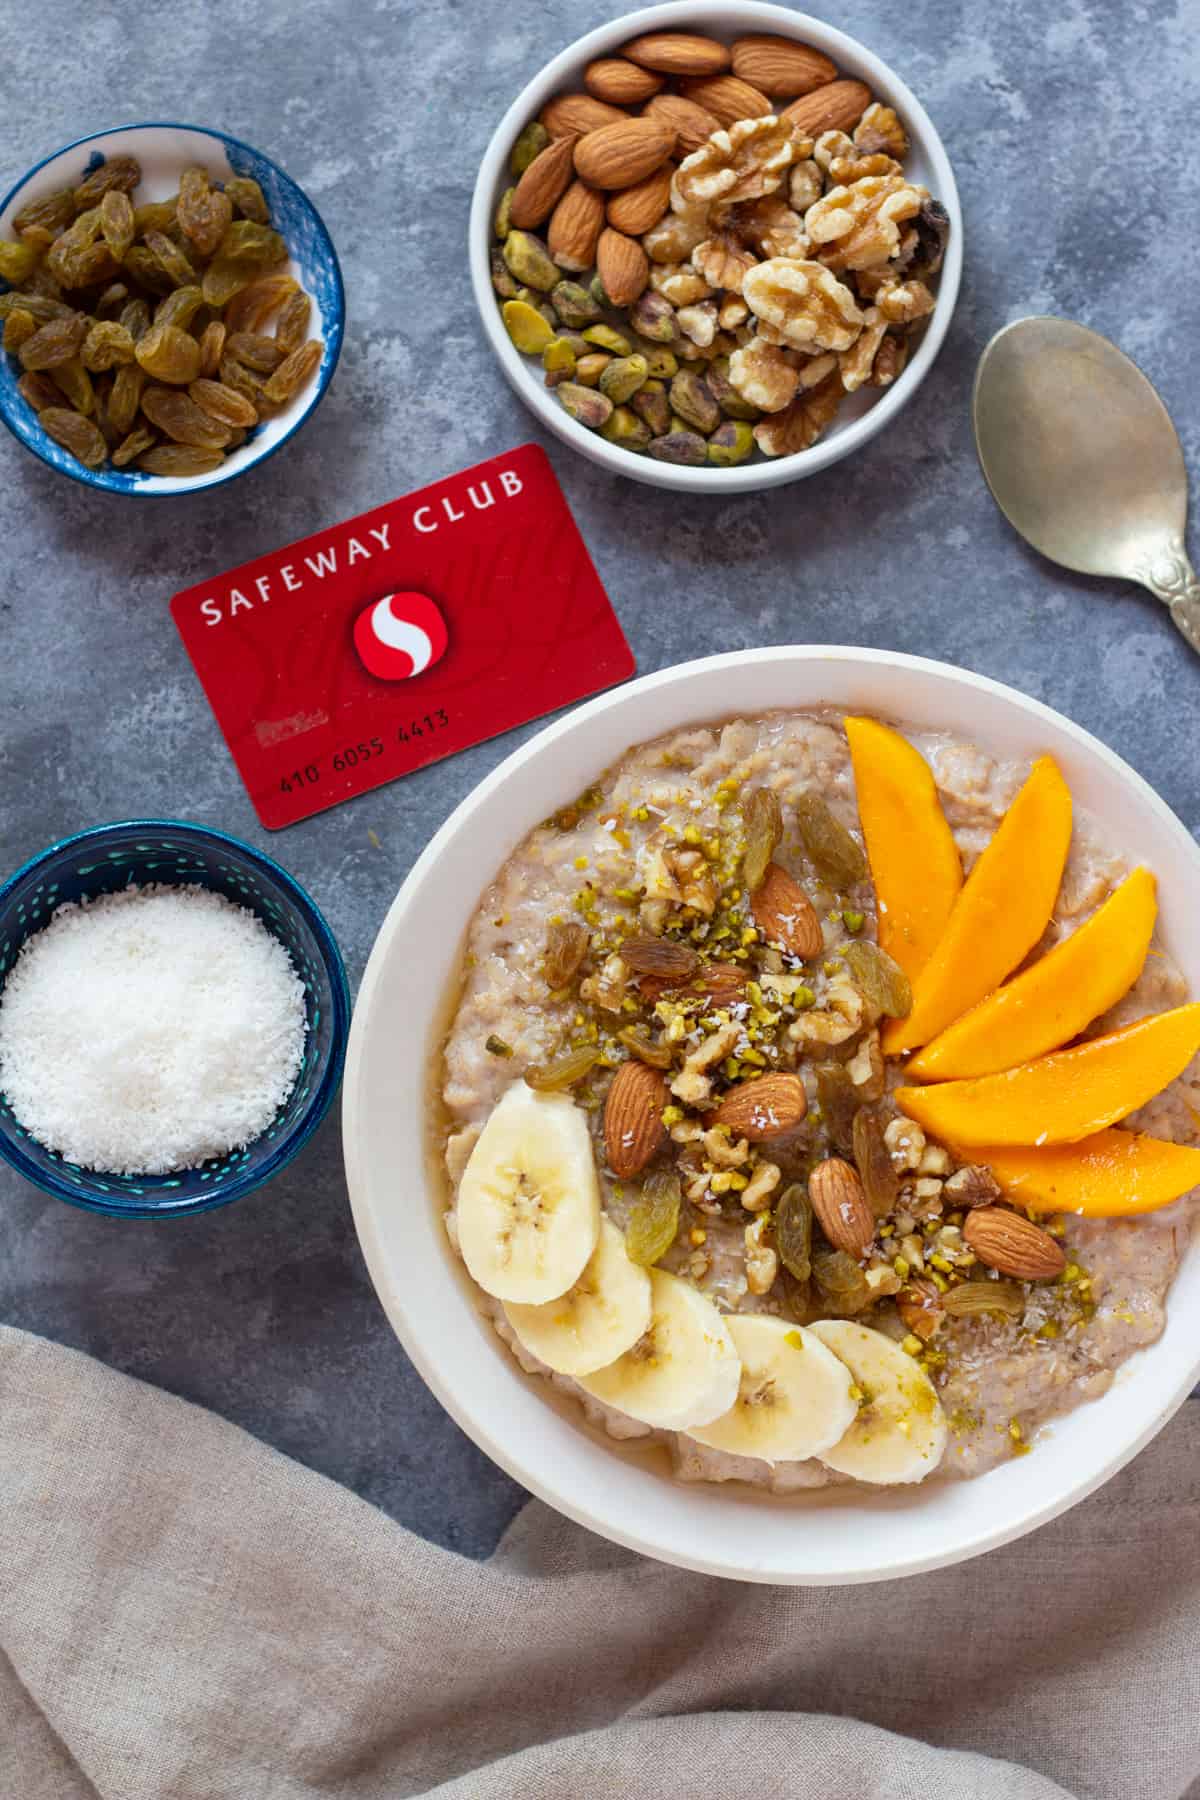 Brighten up your morning with this creamy oatmeal recipe. Adding cardamon and honey to a breakfast staple results in a bold, yet comforting way to start the day.